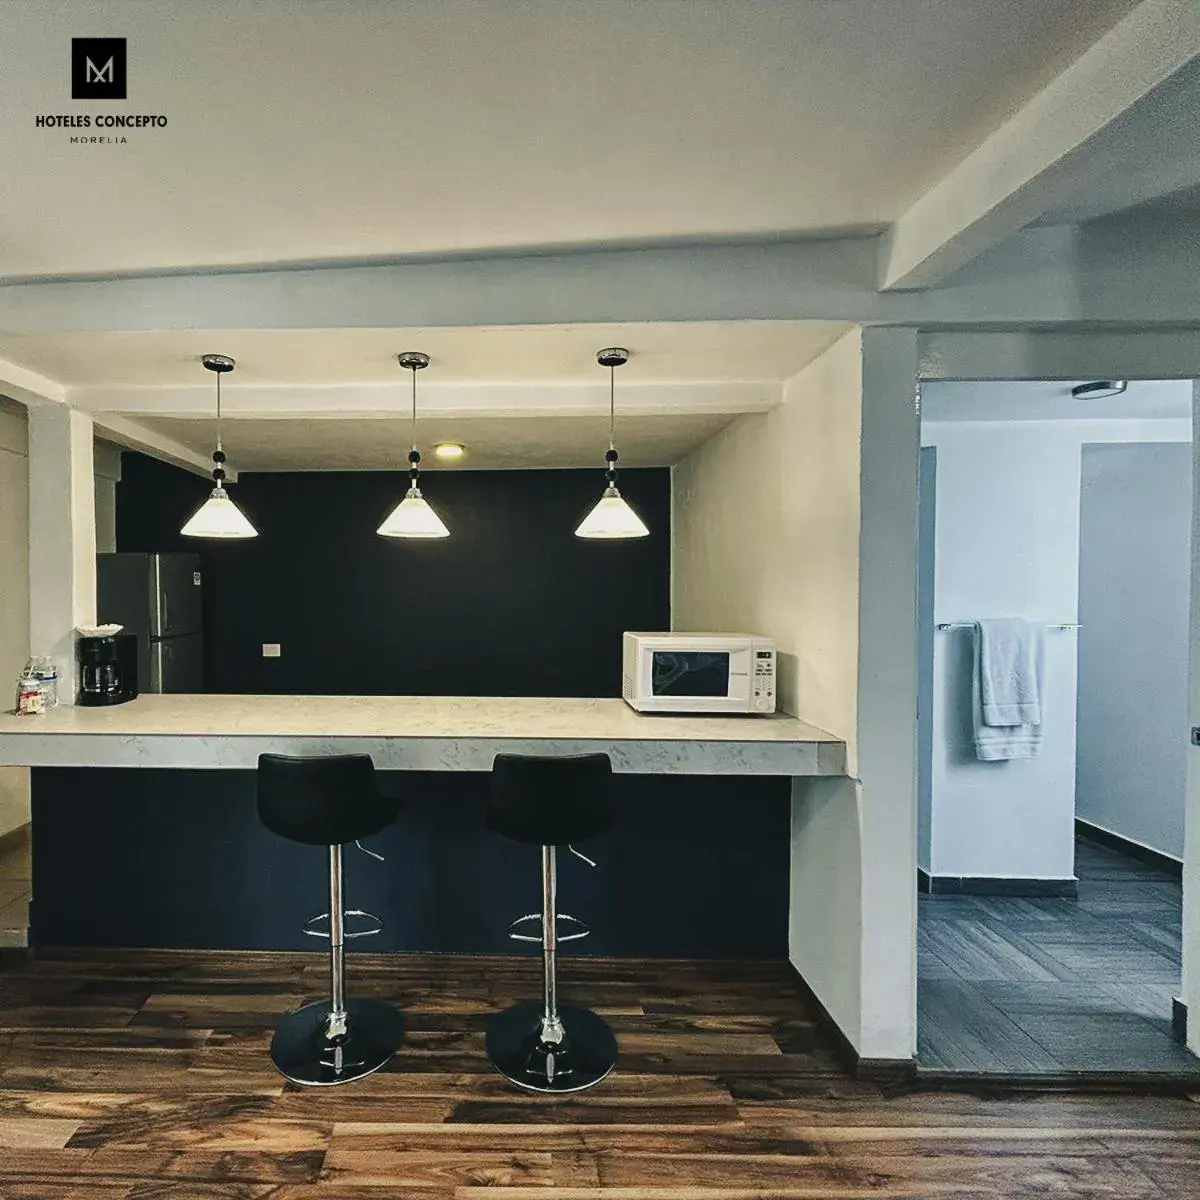 Kitchen or kitchenette in M Hoteles Concepto